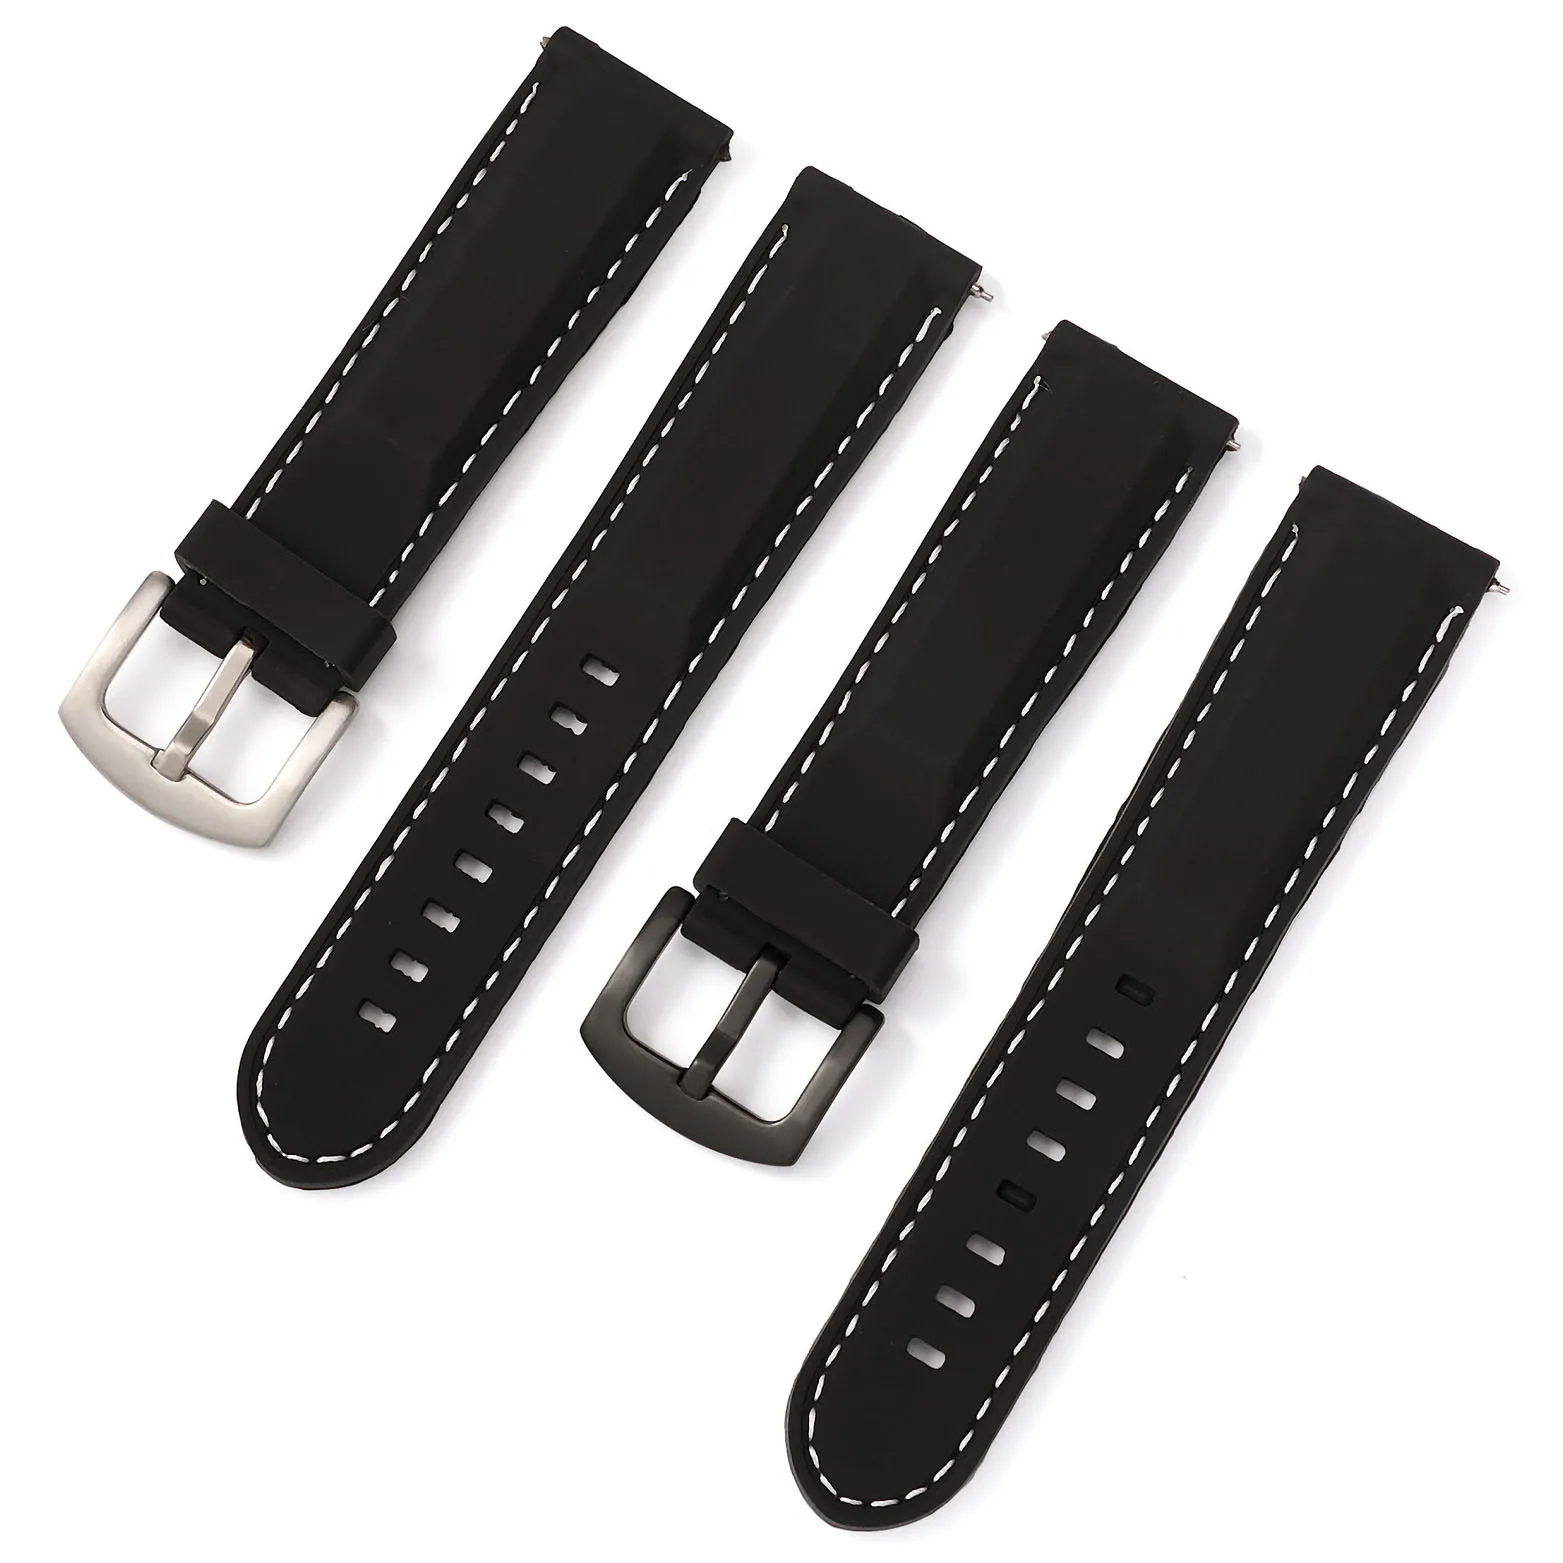 Quick Release Pins Sport Rubber Watch Strap 18mm 20mm 22mm 24mm Replacement Silicone Watchband Waterproof Wrist Watch Band Belt